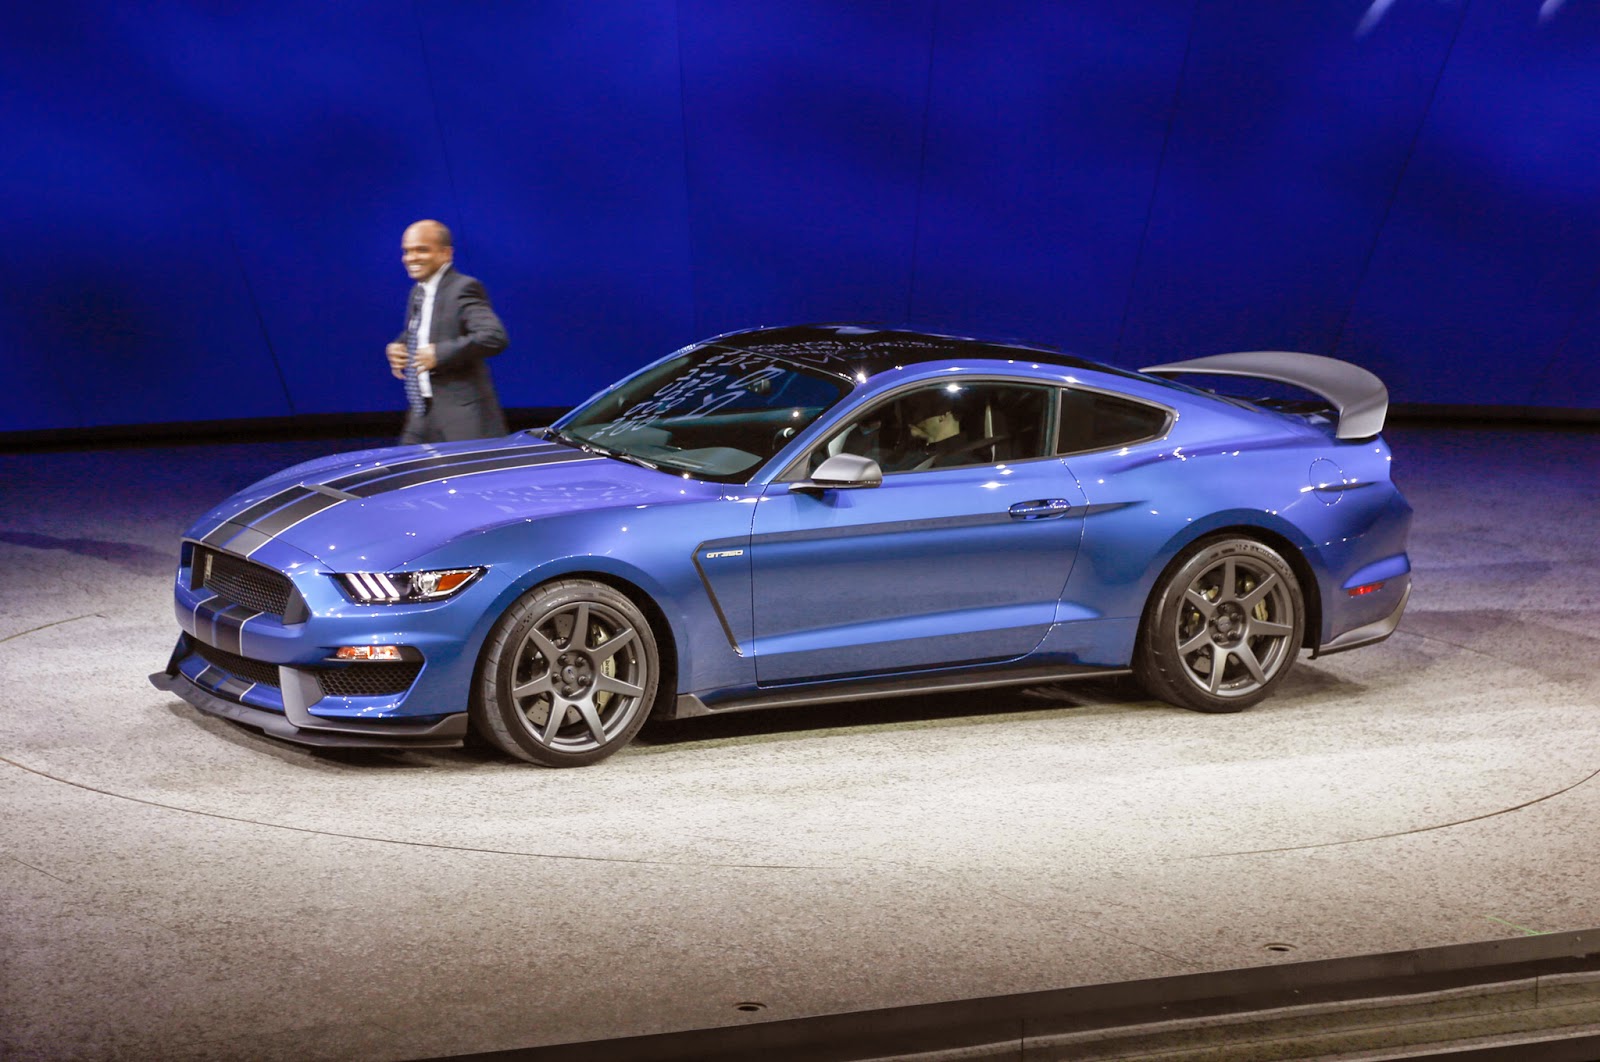 Mobil Ford Shelby GT350R Mustang Dibuat Unlimitid